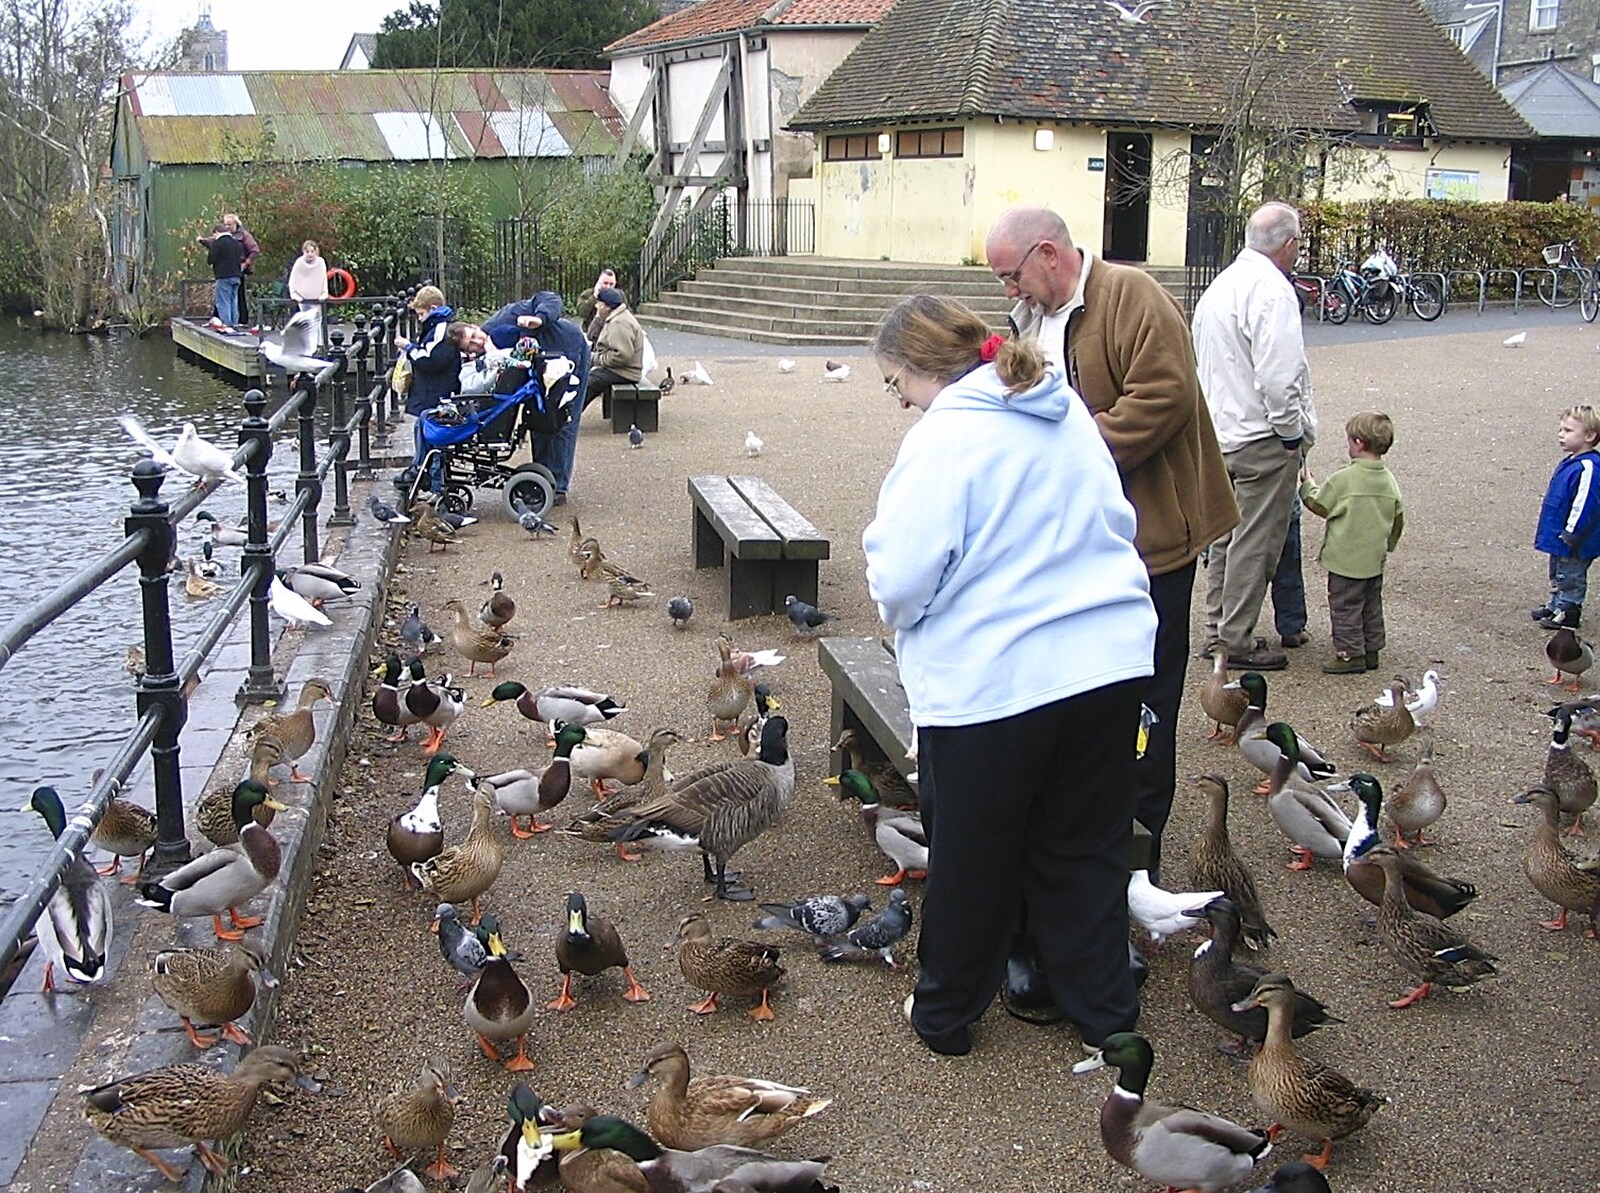 Pigeons, ducks and geese are all in on it from Feeding the Ducks: a Diss and Norwich Miscellany - 7th November 2004